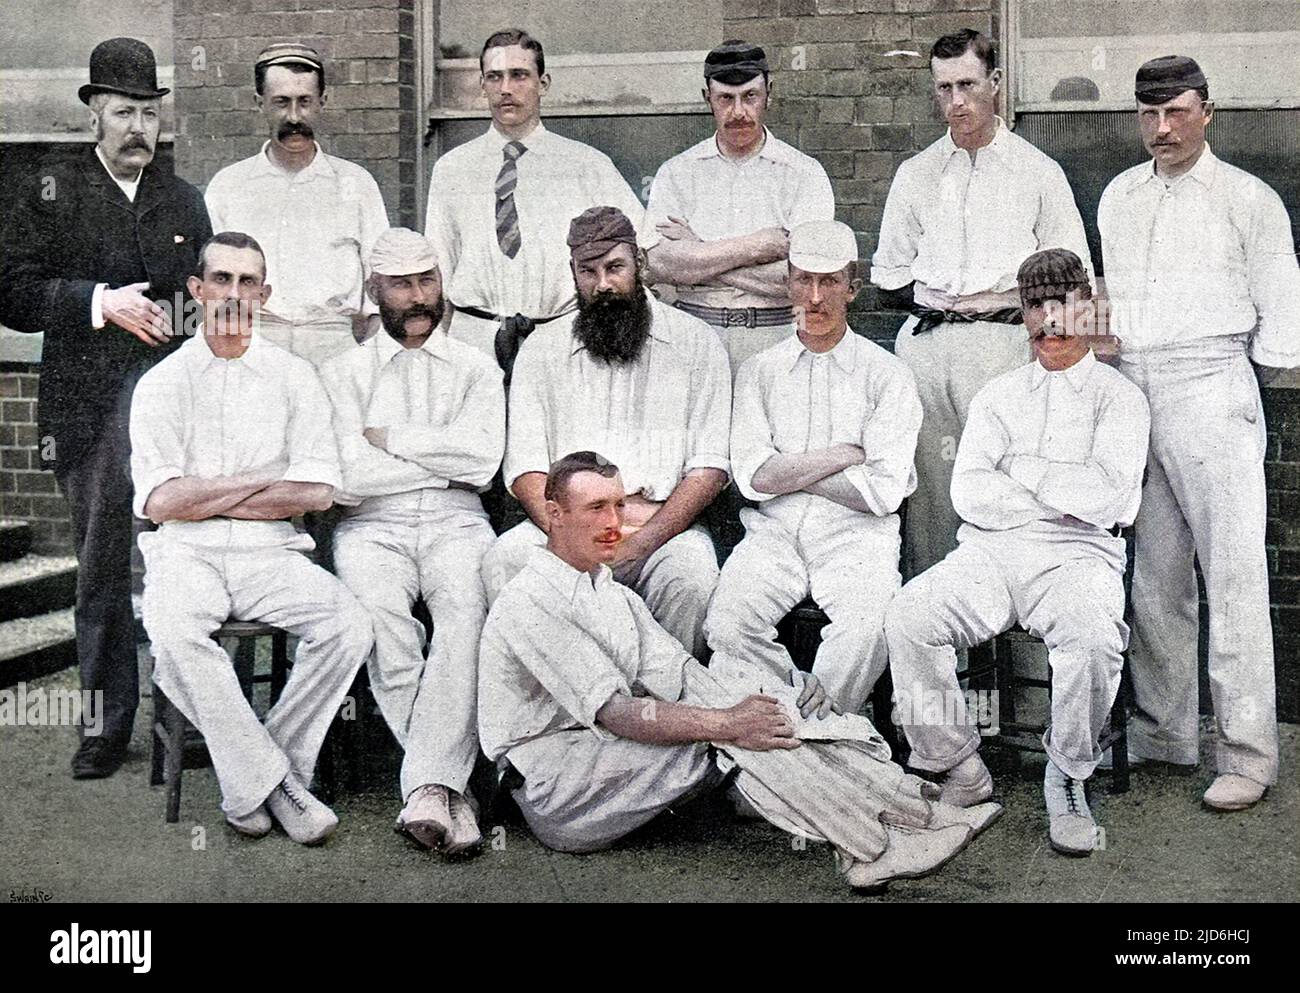 Photograph of Gloucestershire County Cricket team for the 1892 season. Back row, left to right: J.Smith (scorer), E. Sainsbury, S.A.P. Kitcat, Roberts, Murch, Painter. Middle row, left to right: Captain A.H. Luard, E.M. Grace, Dr. W.G. Grace (captain), Woof, O.G. Radcliffe. Front row: Board. Colourised version of: 10218928       Date: 1892 Stock Photo